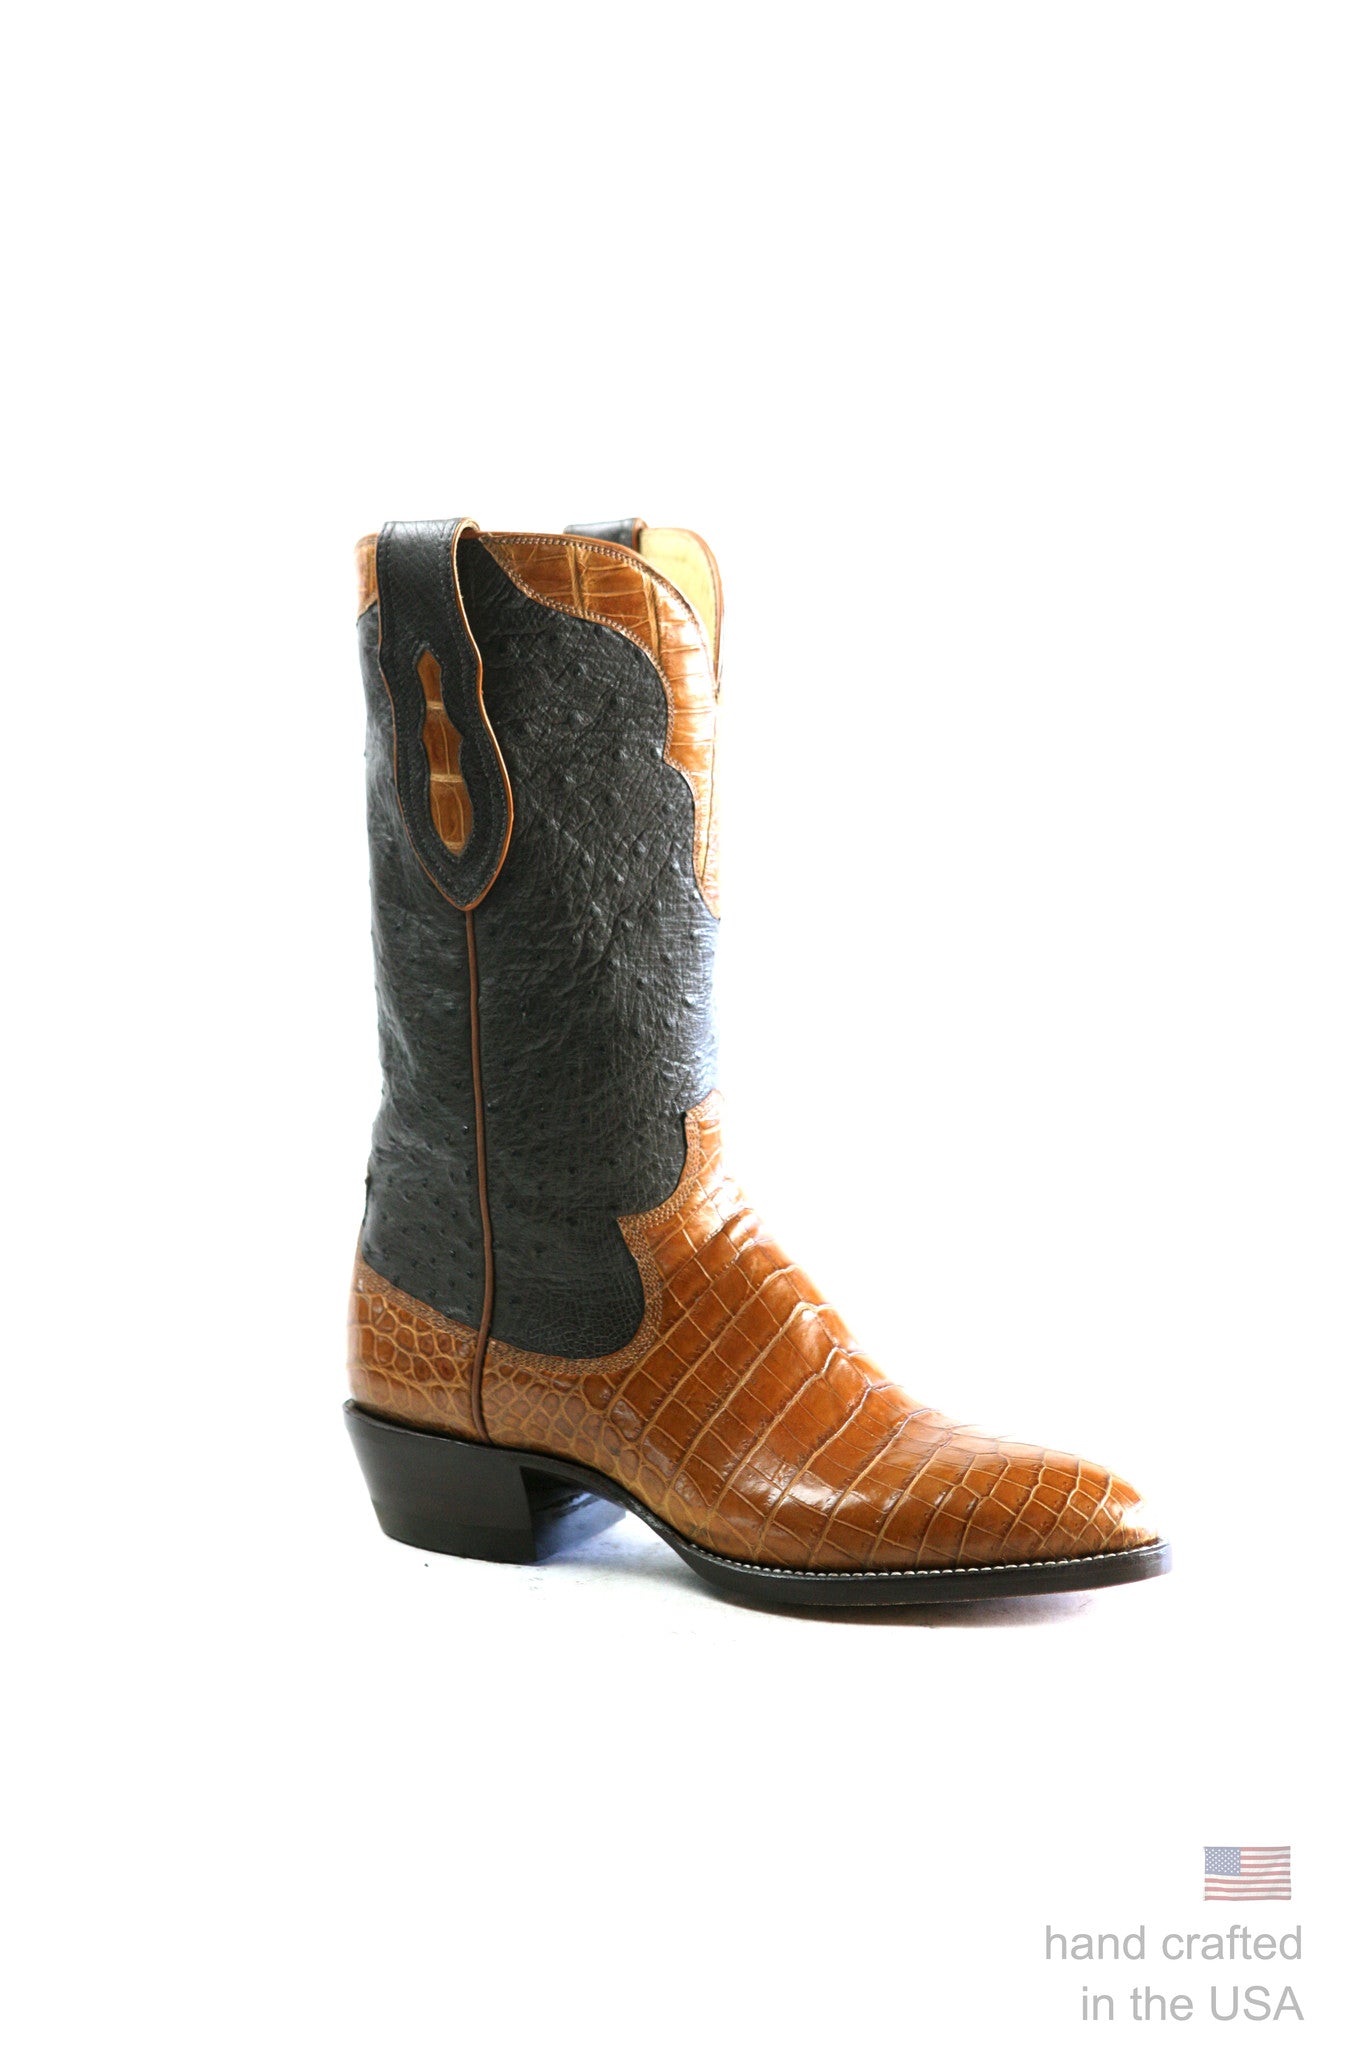 Brown And Blue Cowboy Boots | lupon.gov.ph